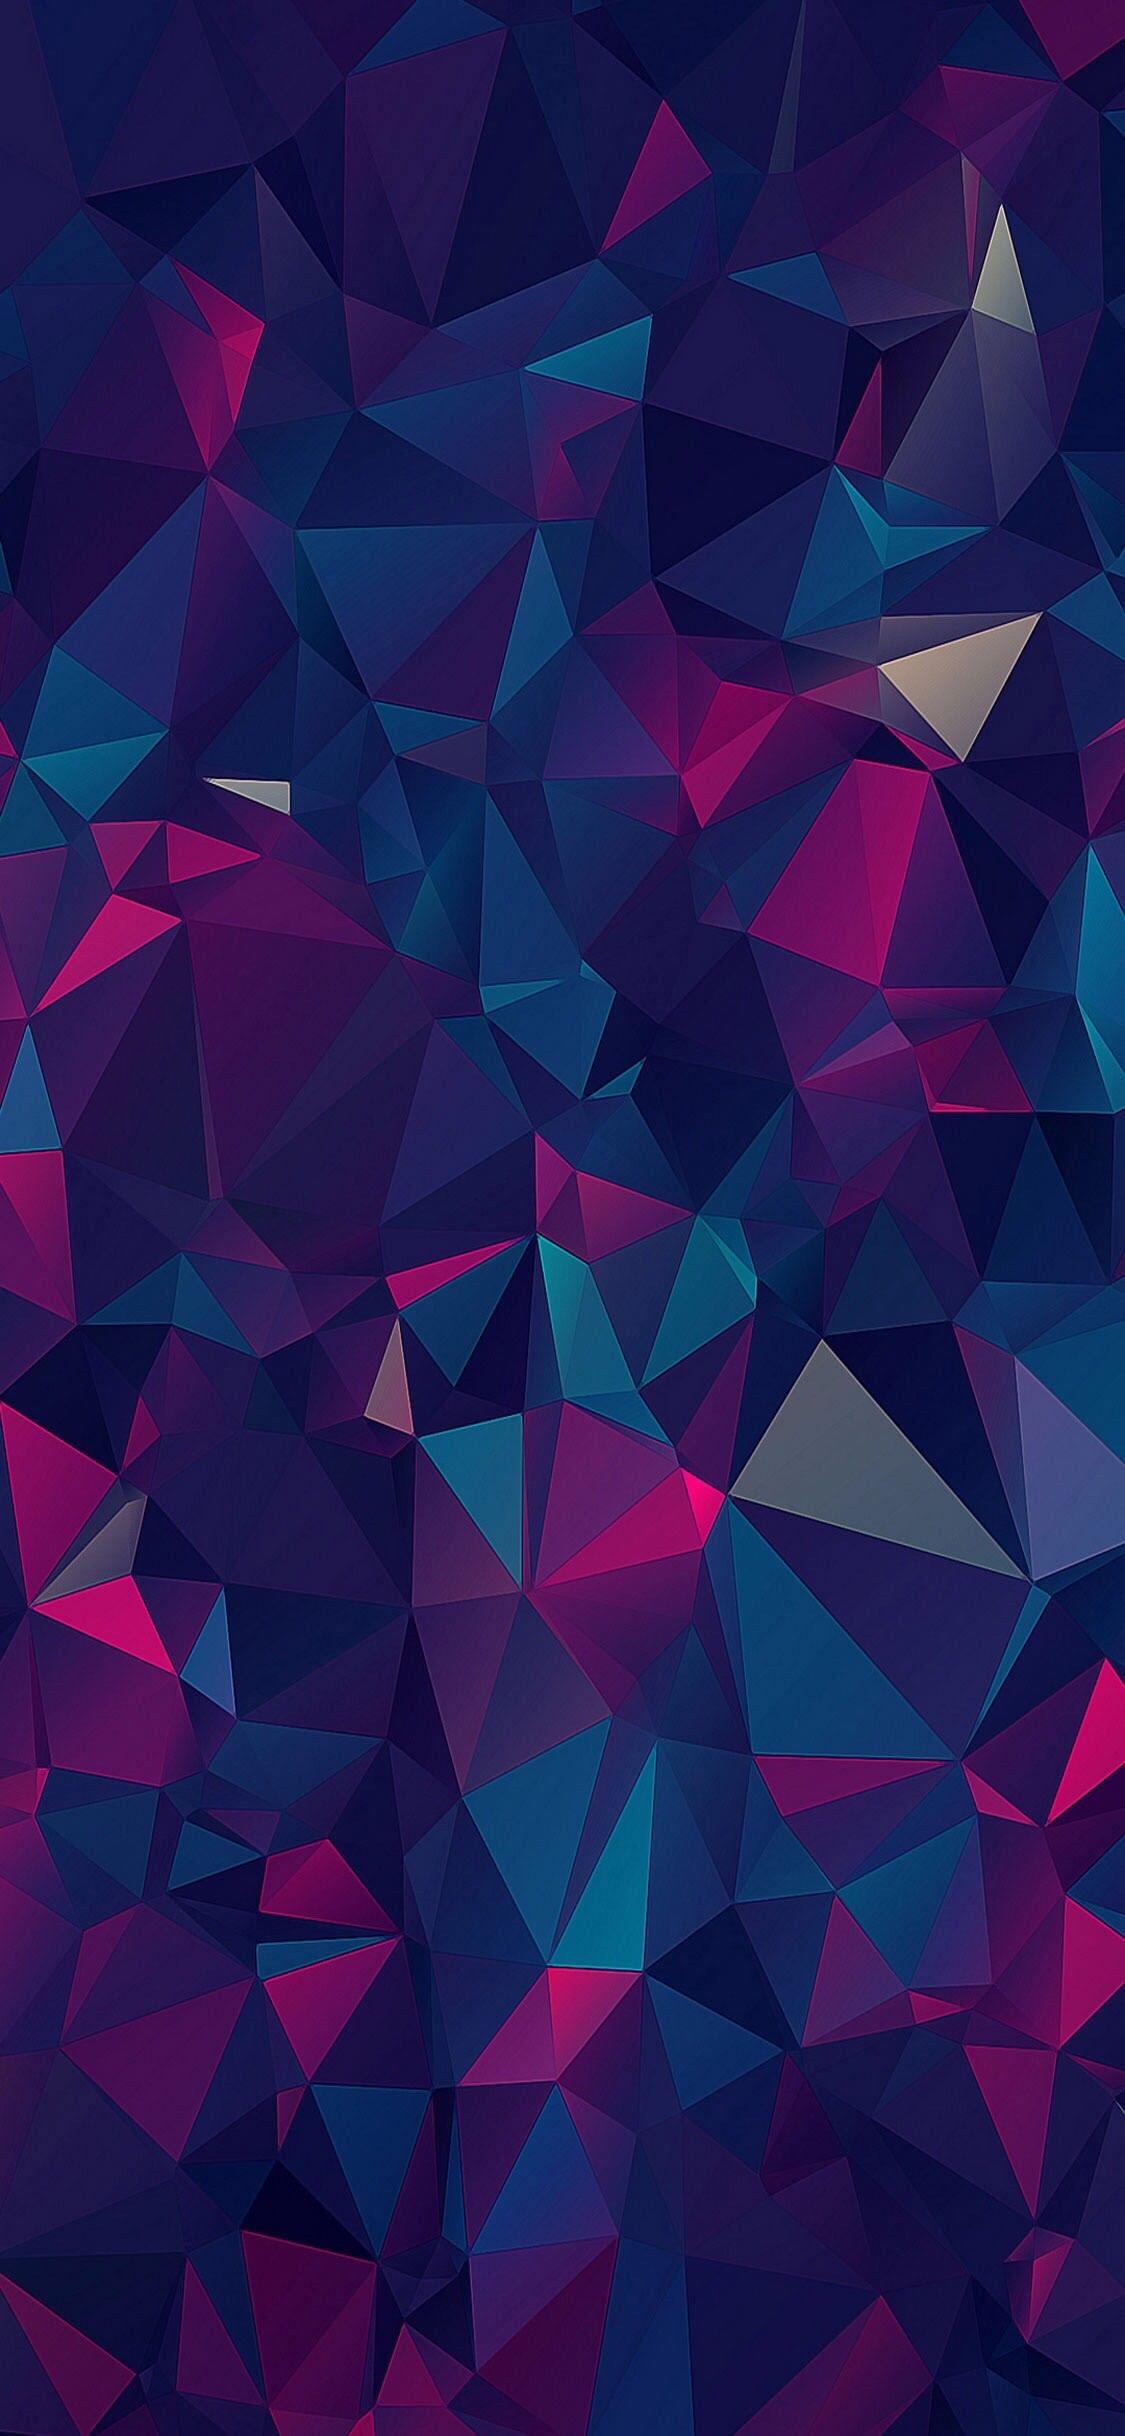 iOS iPhone X, purple, blue, clean, simple, abstract, apple